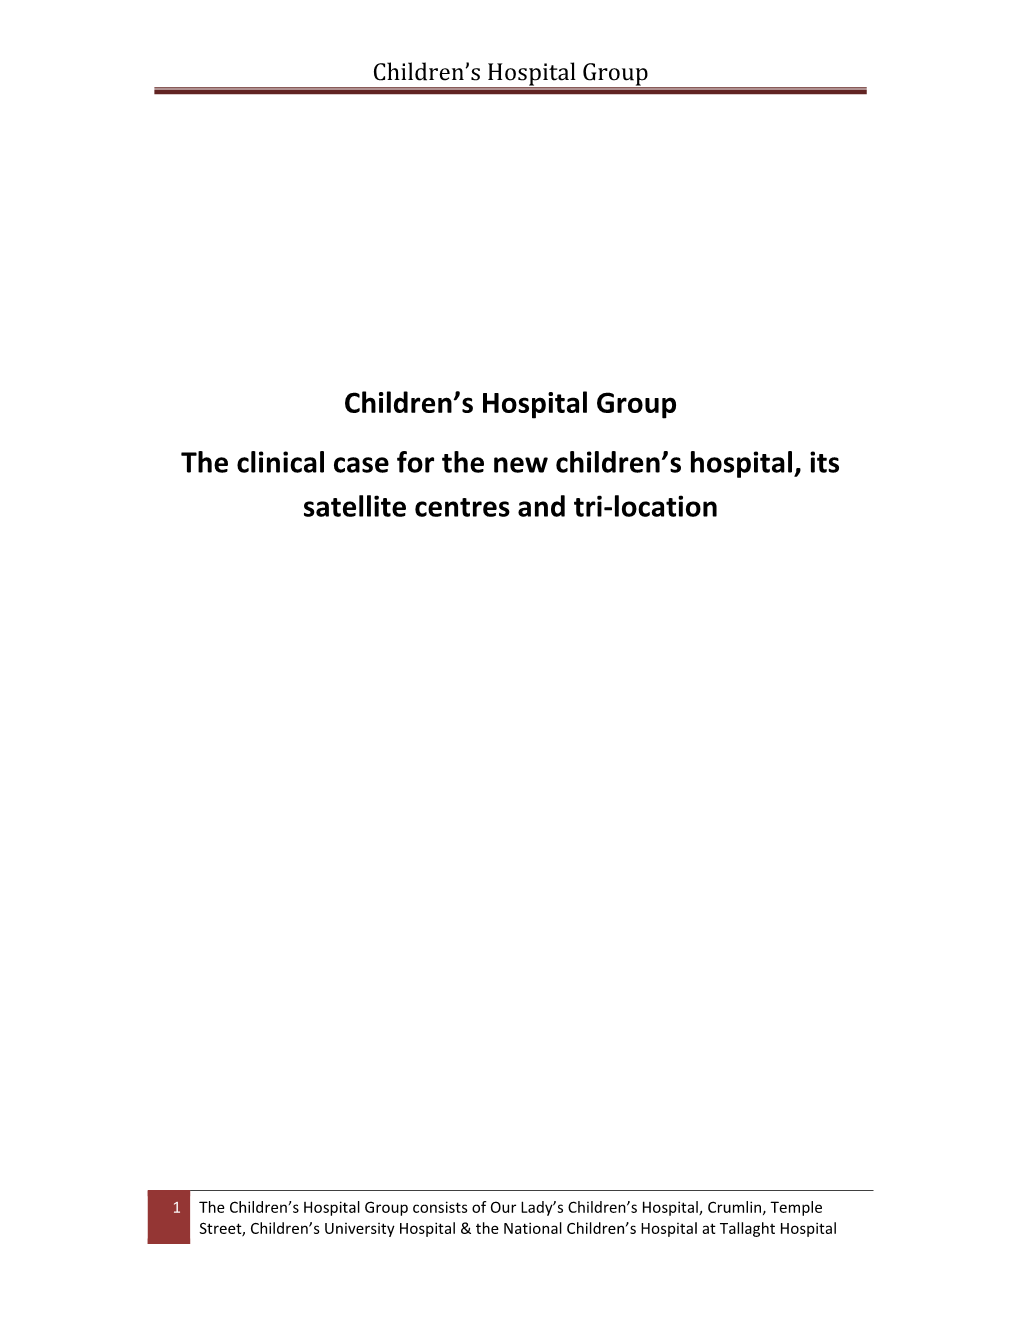 Children's Hospital Group the Clinical Case for the New Children's Hospital, Its Satellite Centres and Tri-Location